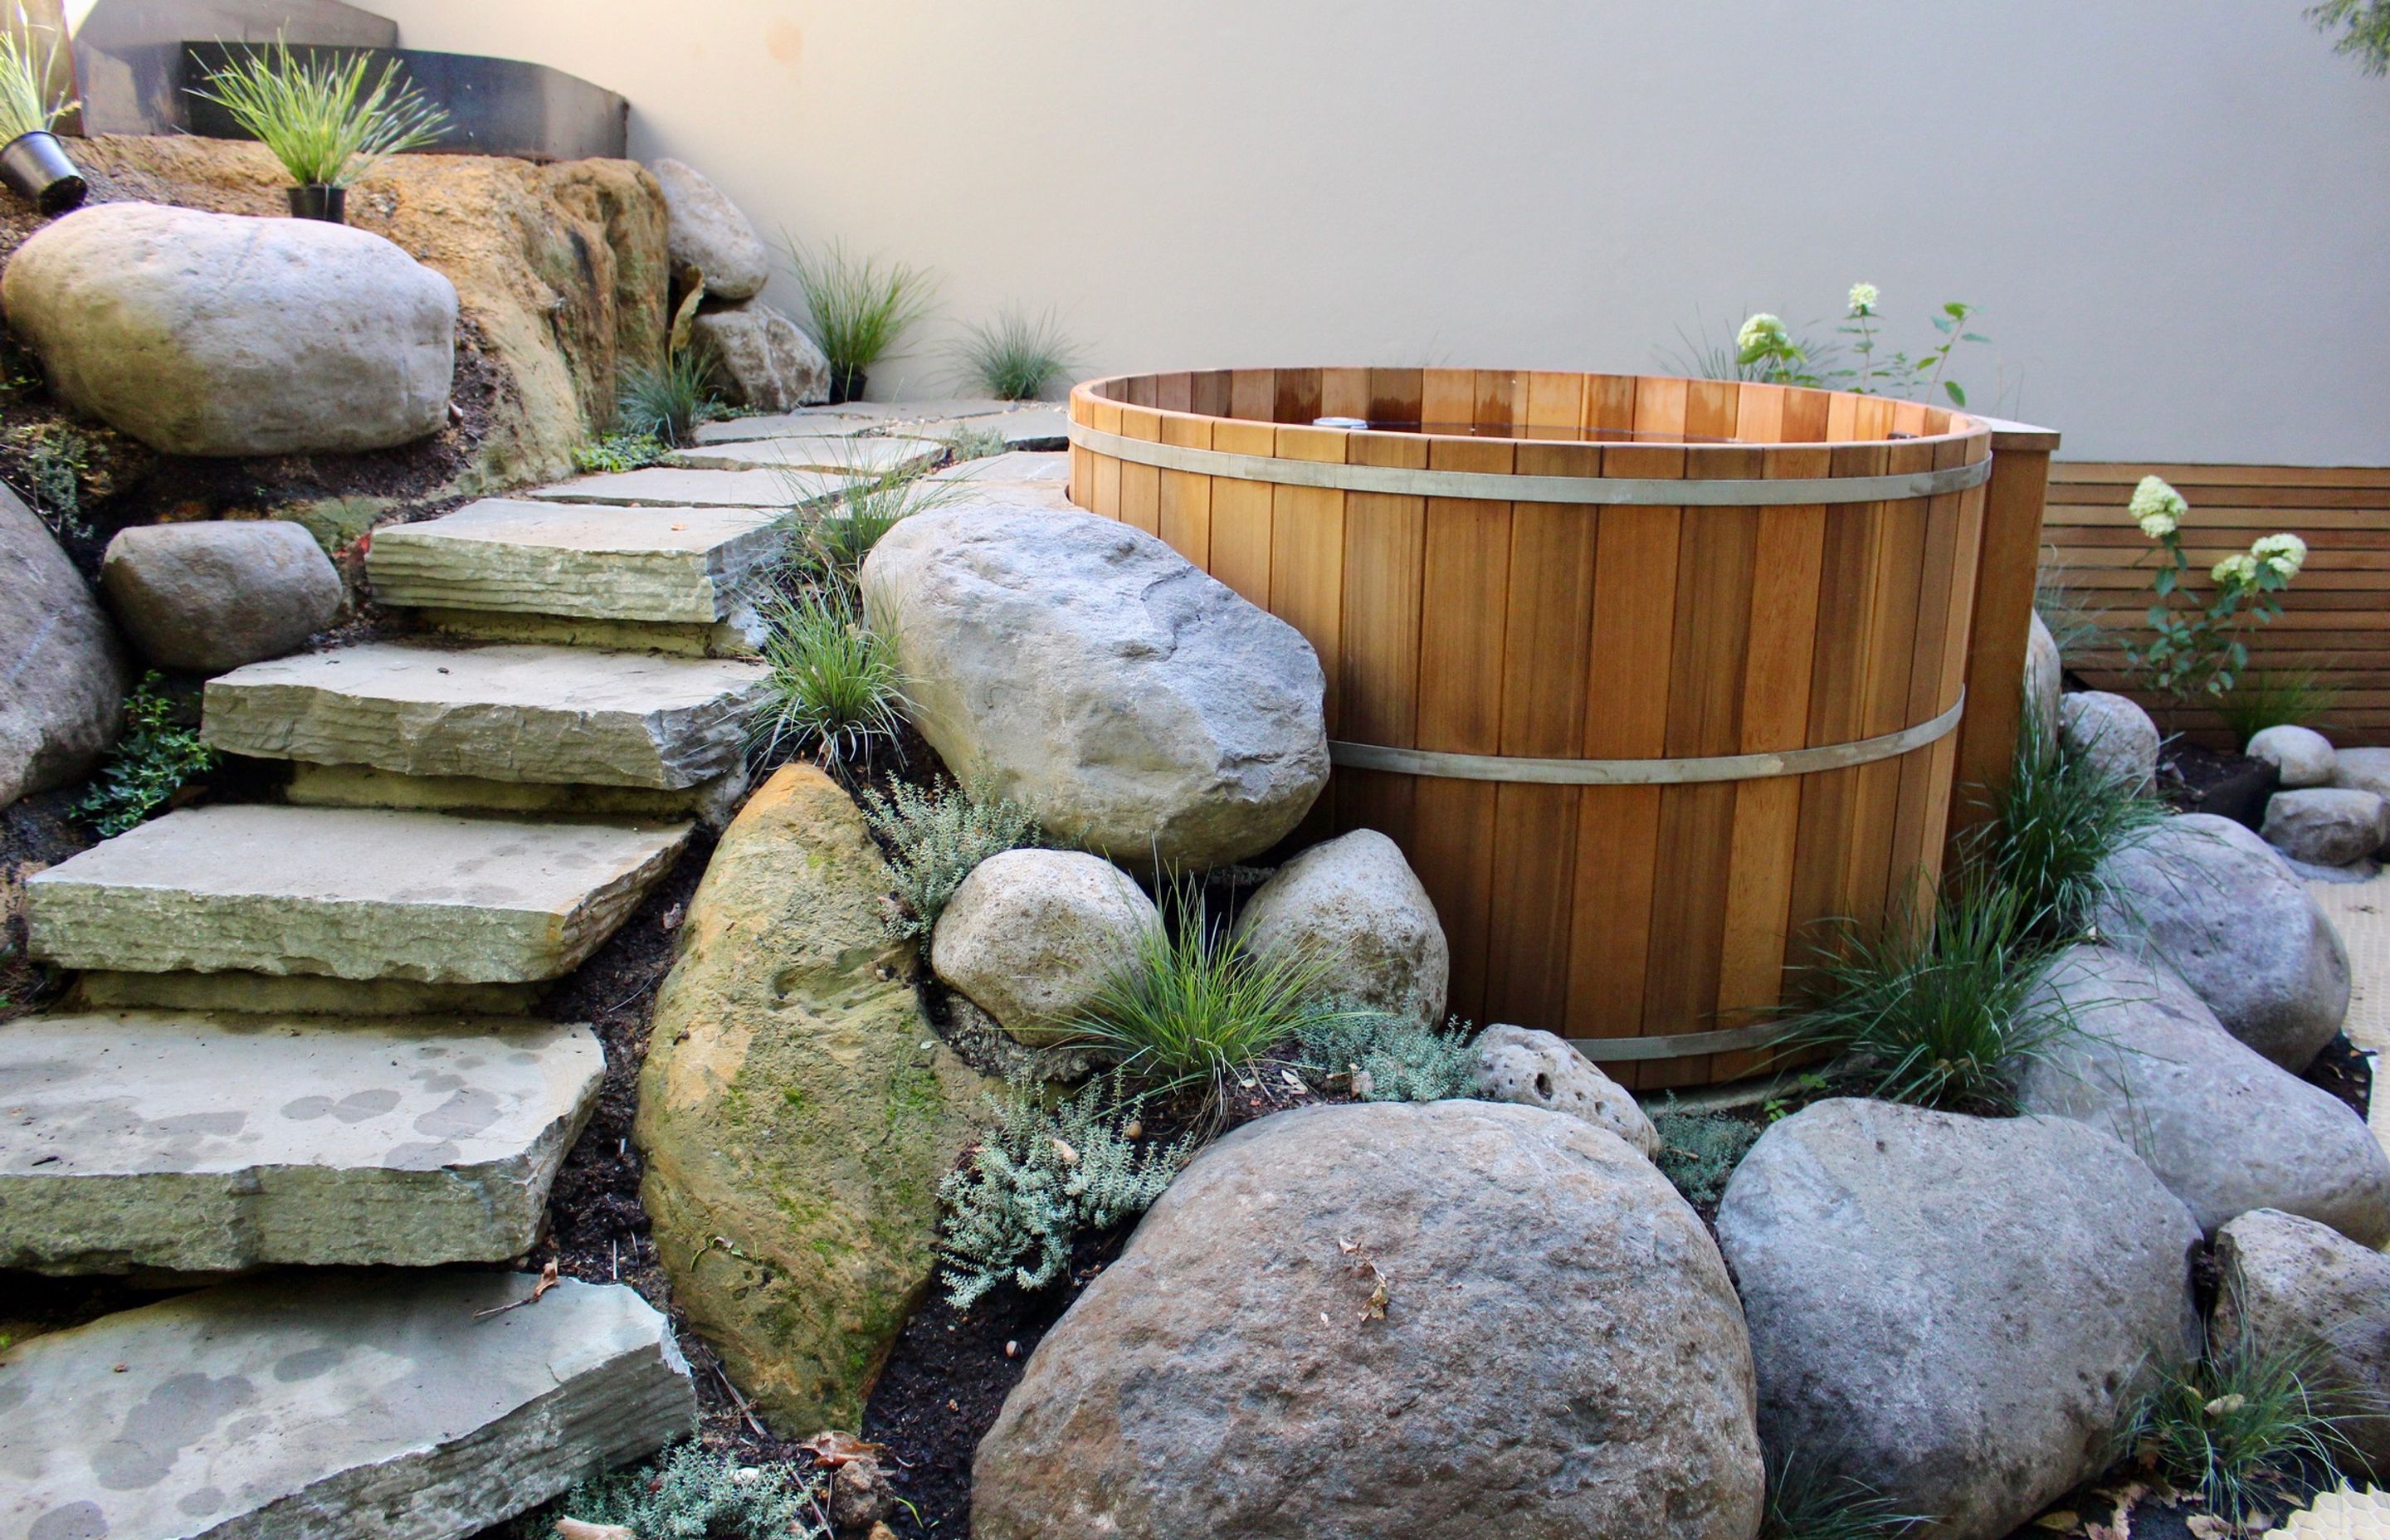 Incorporate a cedar hot tub into your backyard landscaping scheme to create a true lifestyle experience.